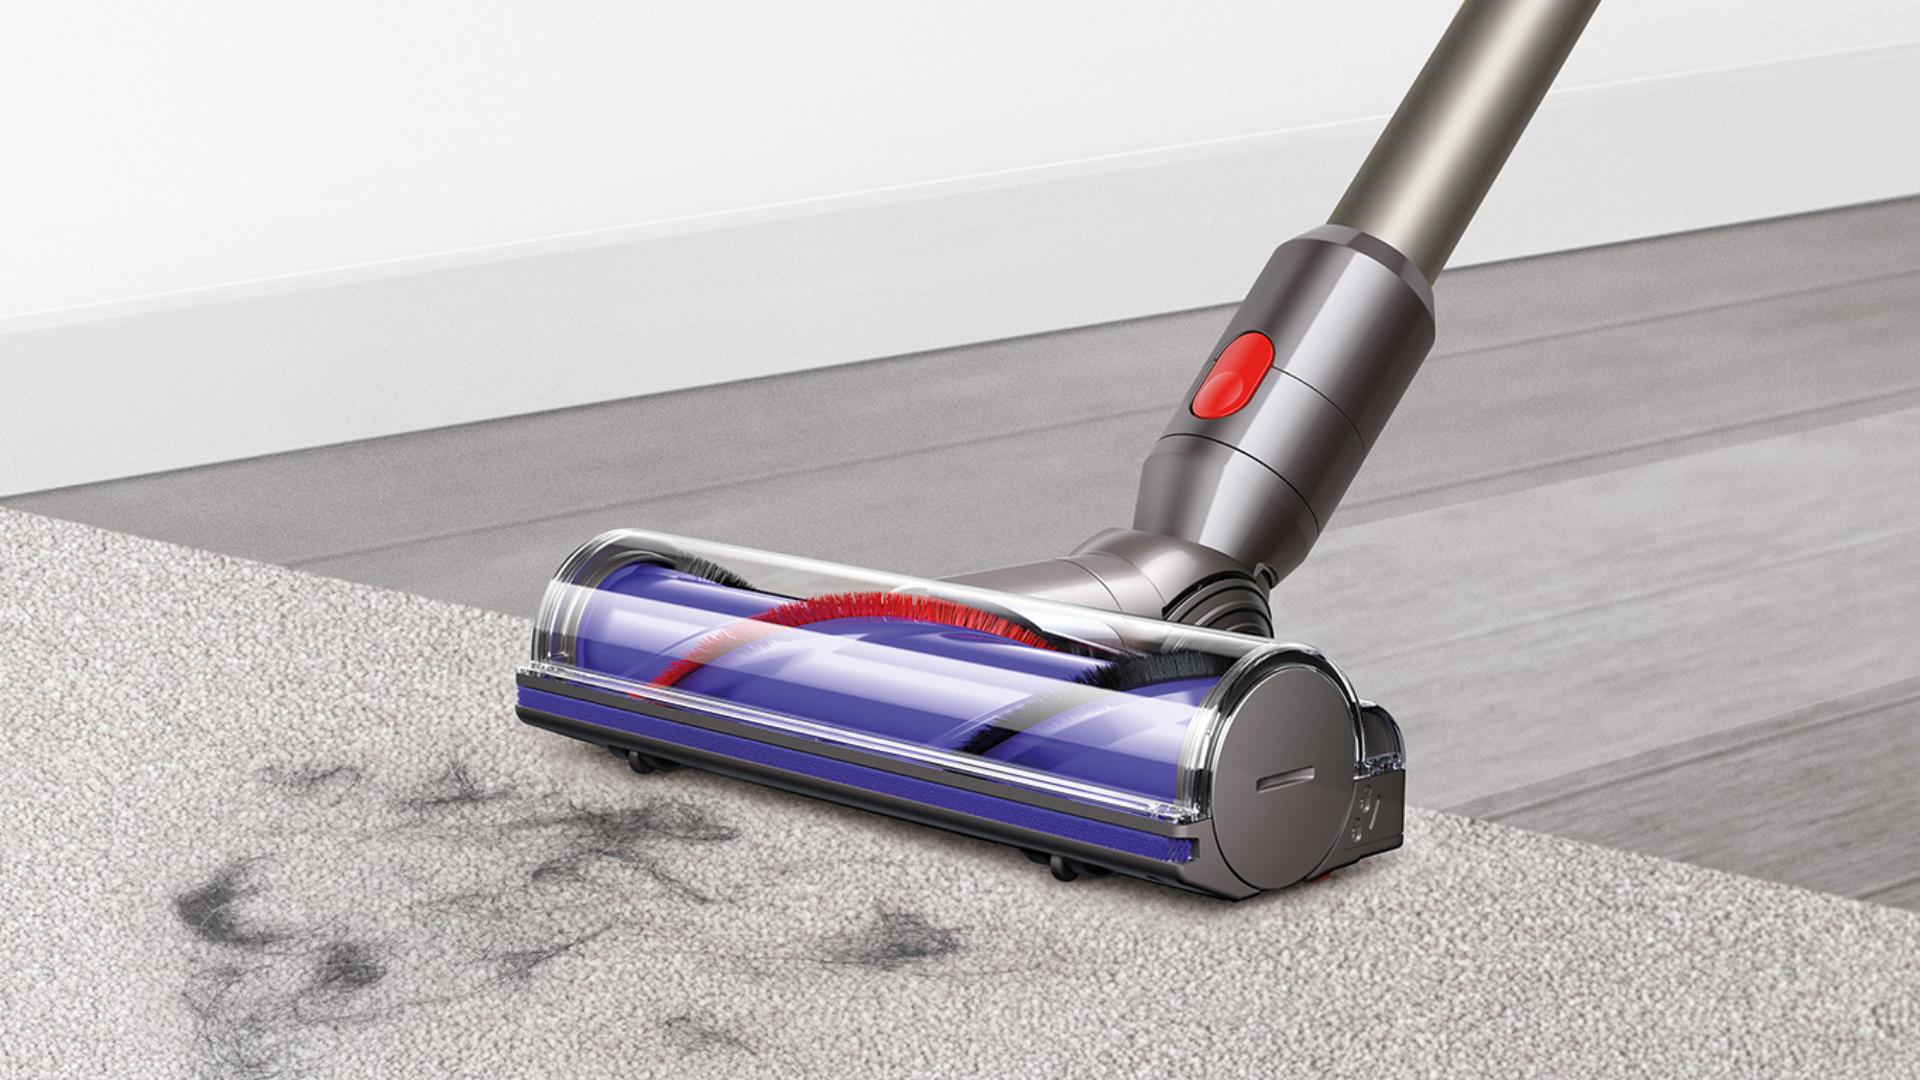 Dyson V8 direct drive cleaner head cleaning across carpet and hard floor